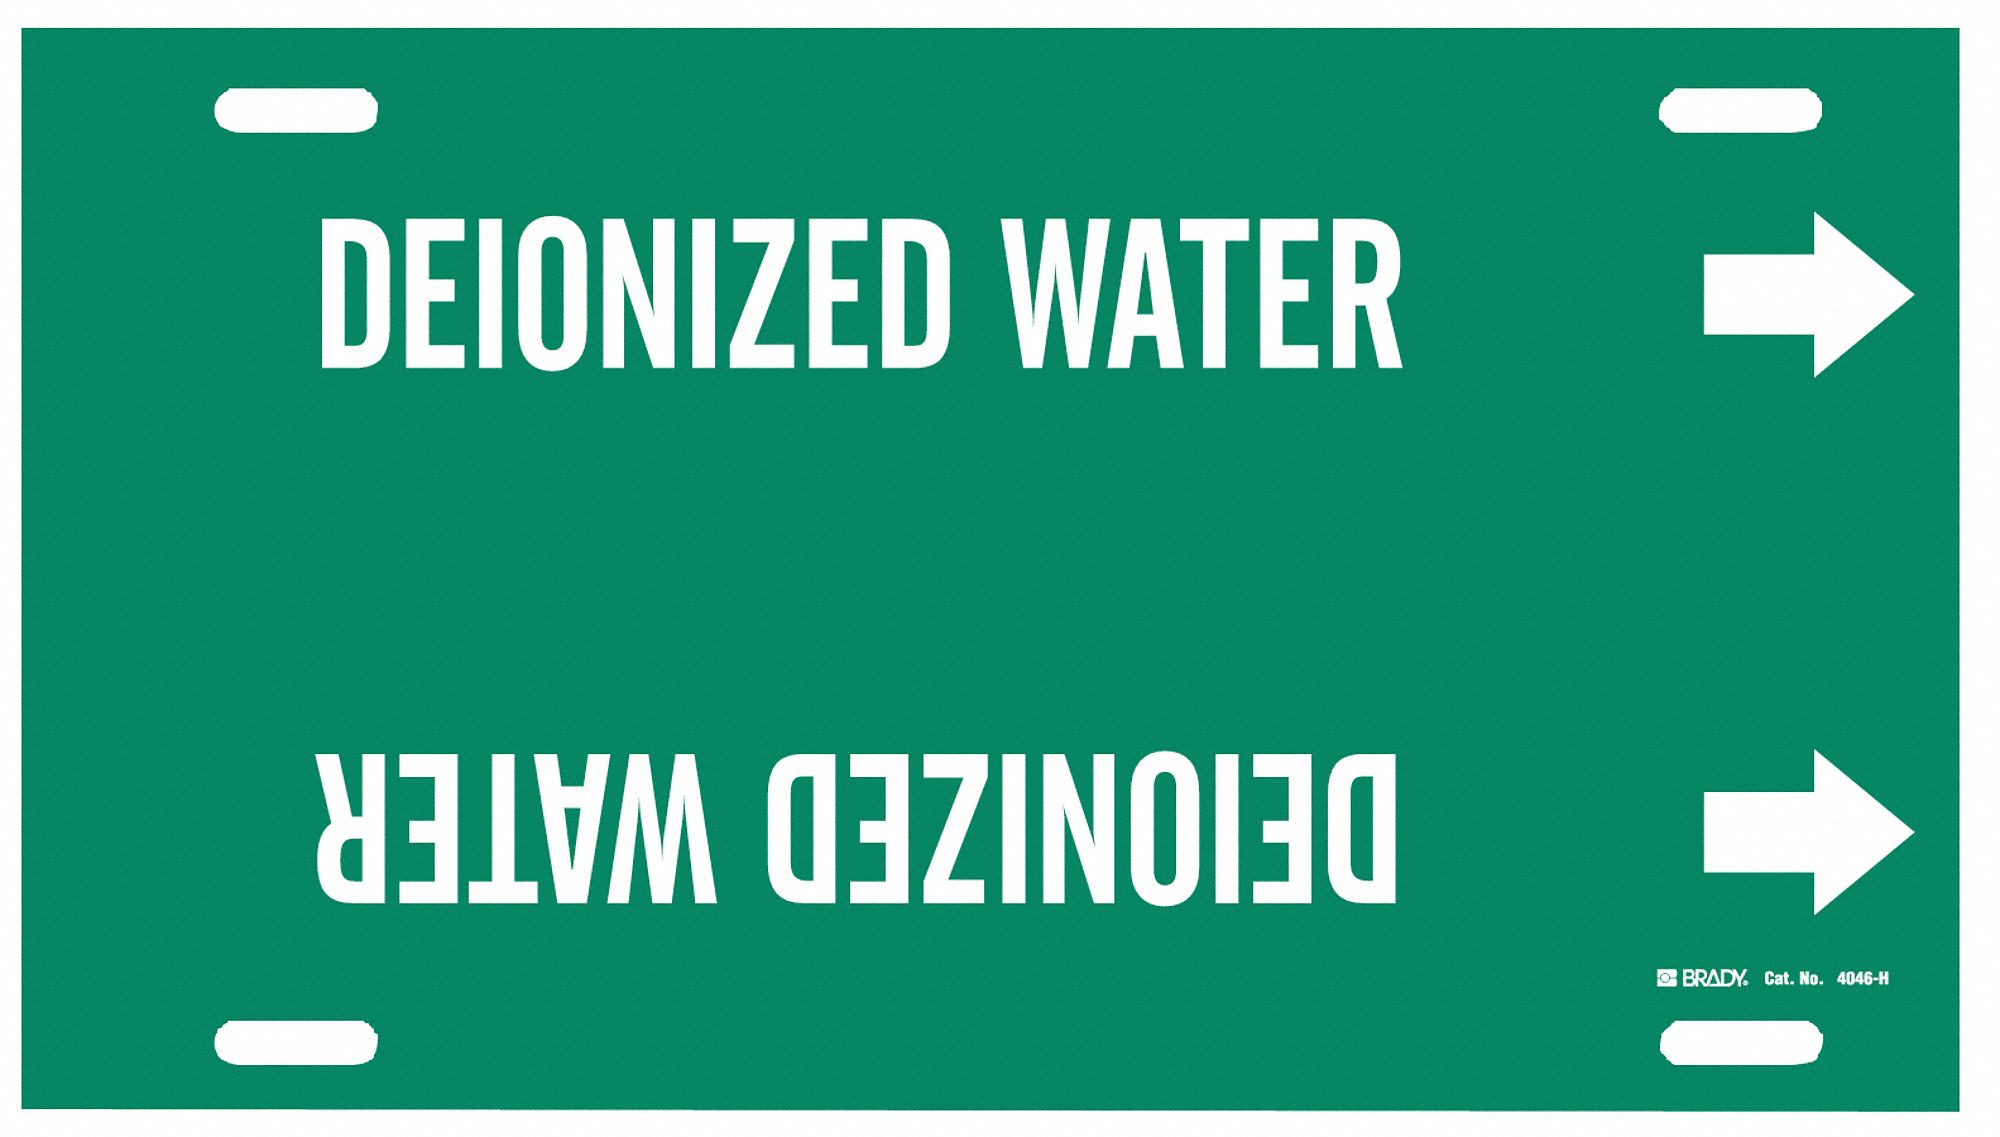 Pipe Marker,Deionized Water,Gn,10to15 In